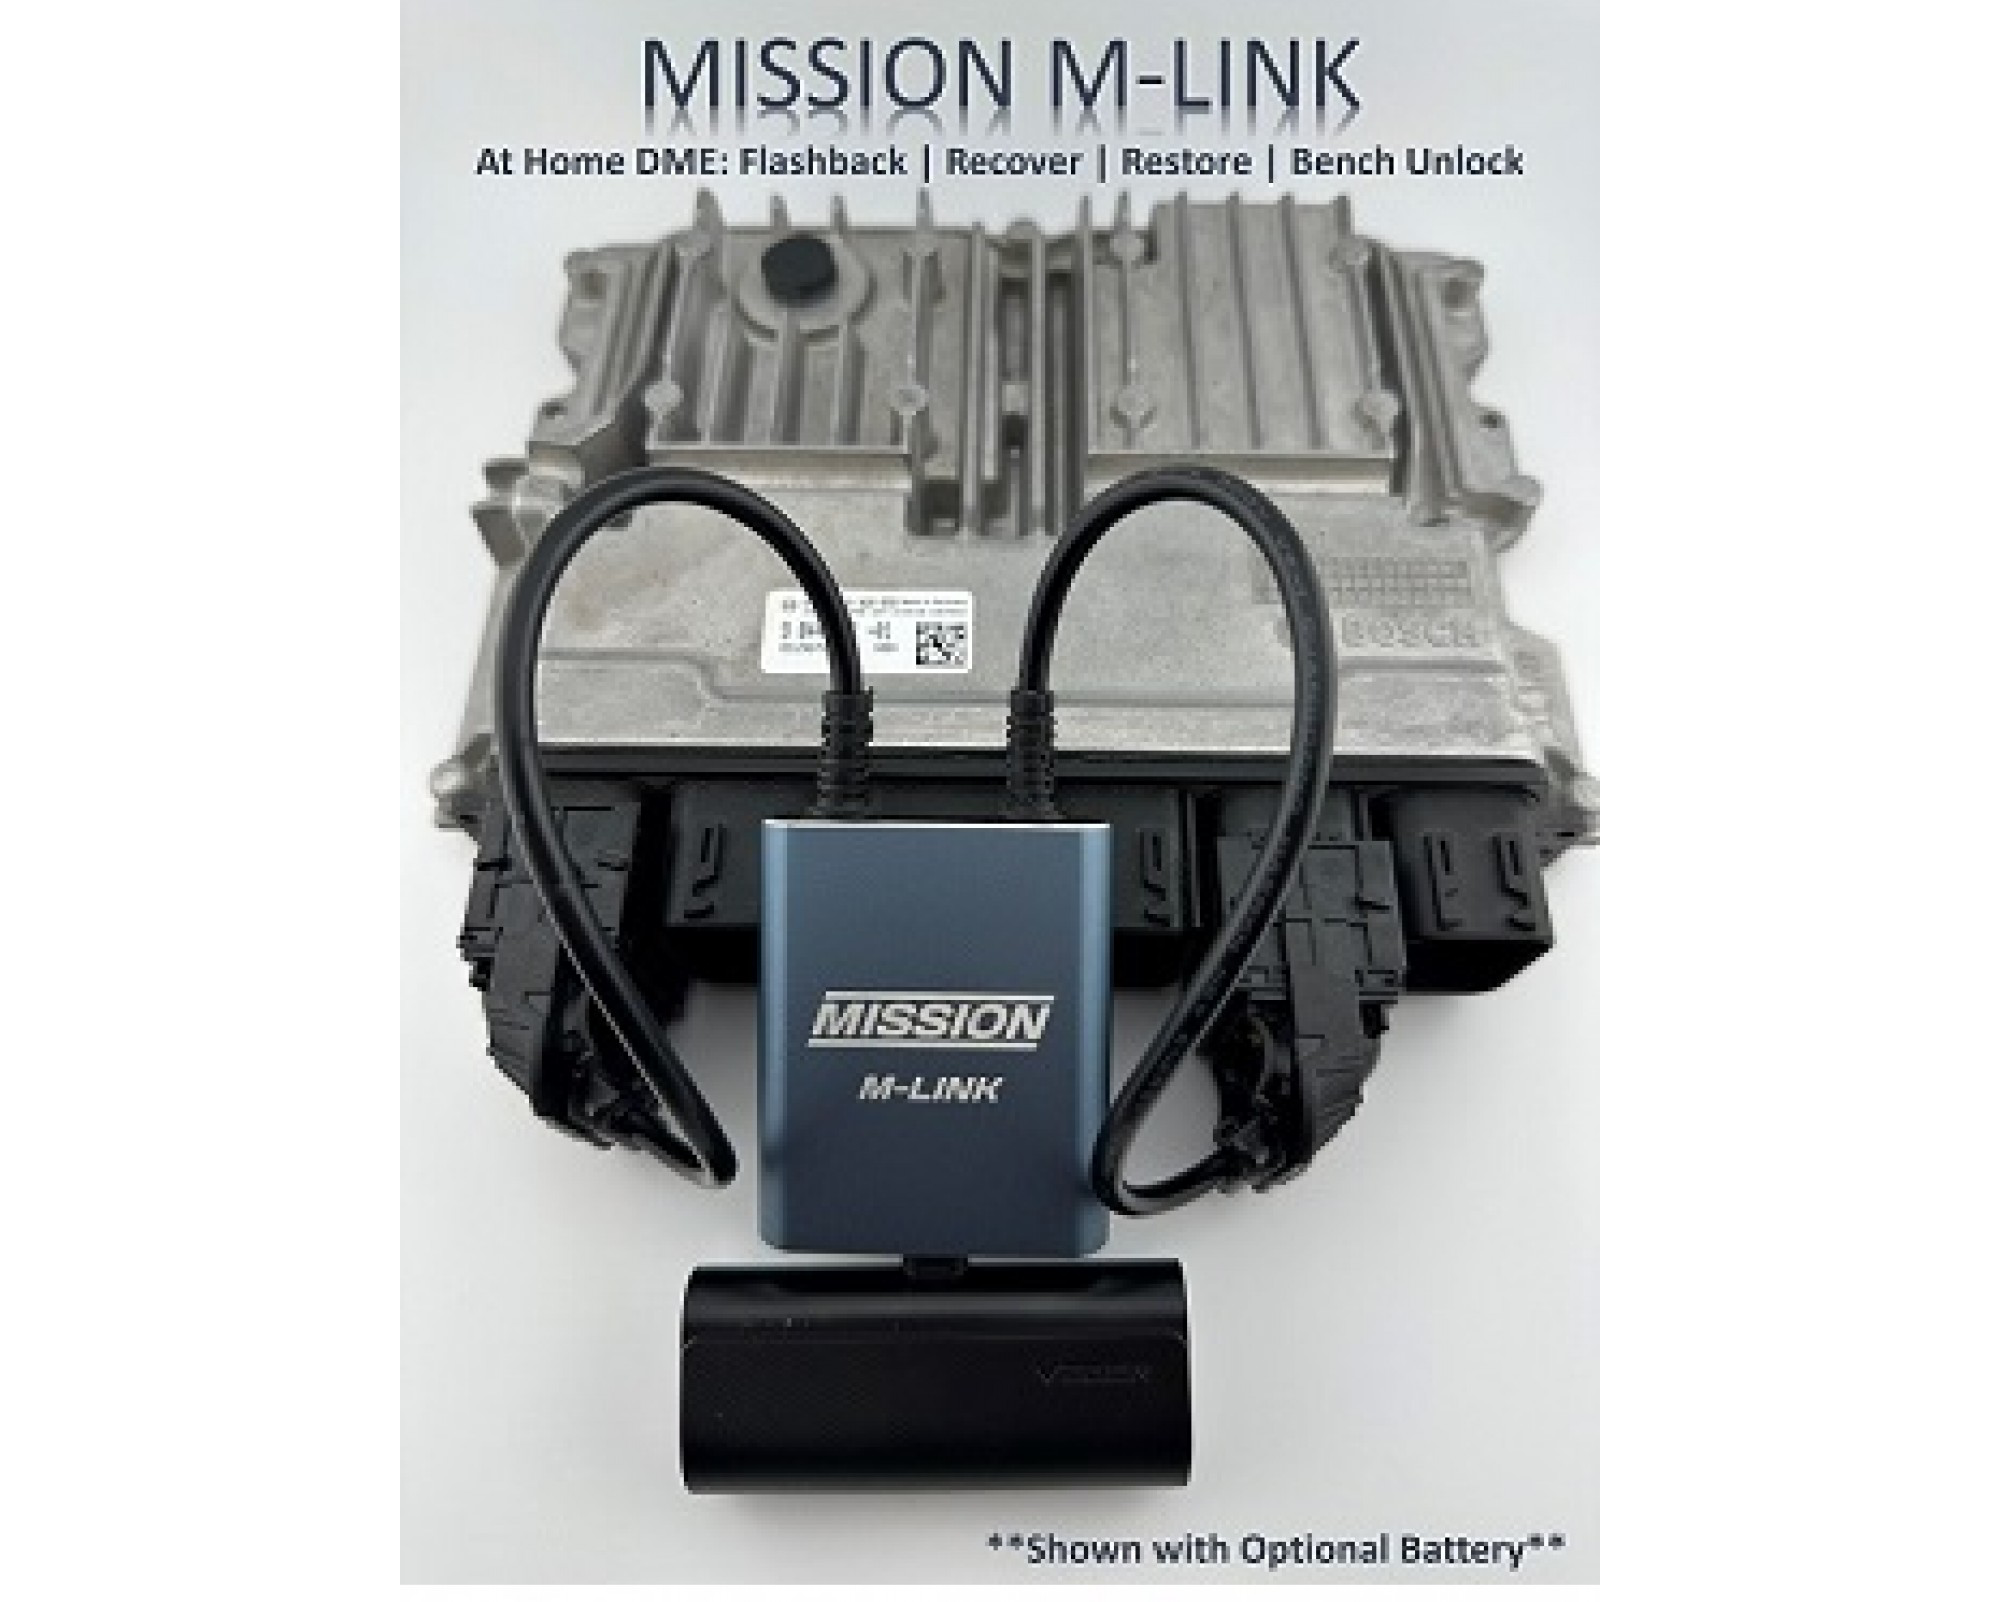 Mission Presents | M-Link | At-Home Bench DME Flashback, Backup, Recover, and Unlock